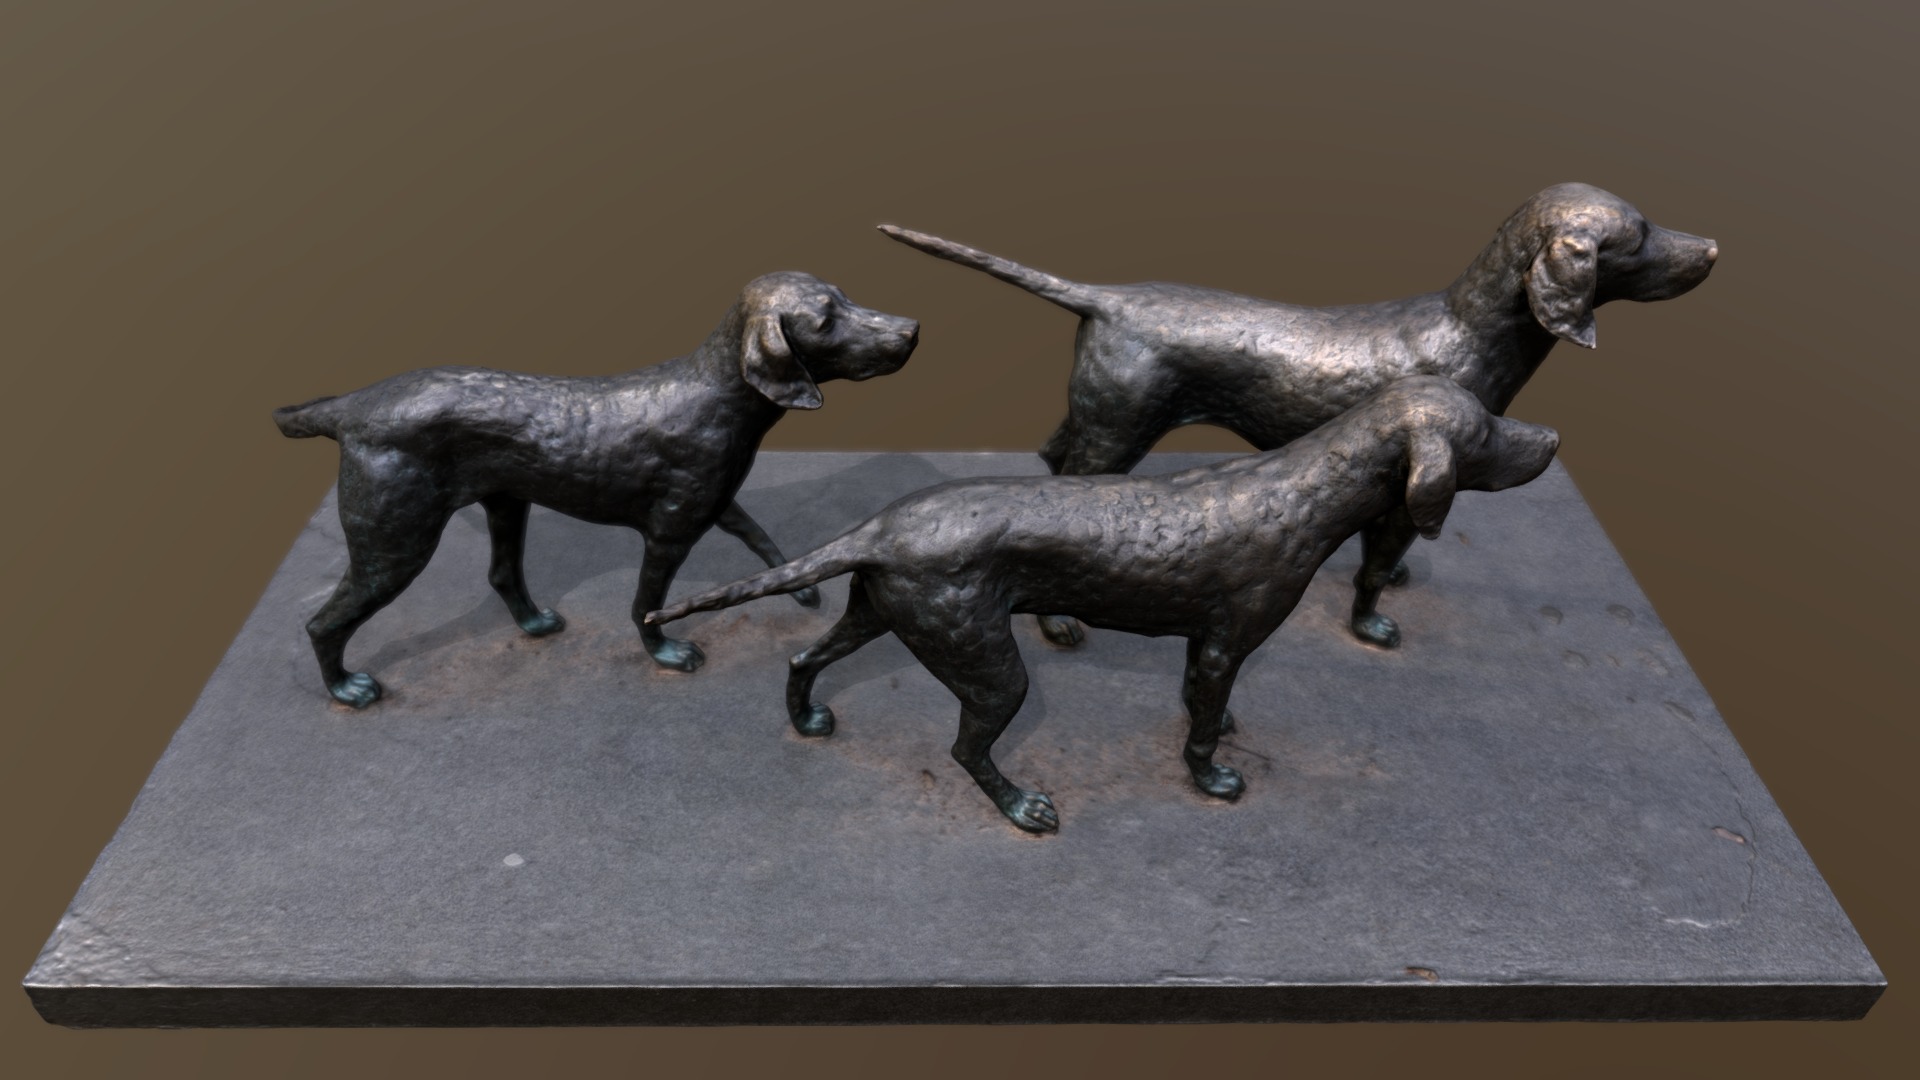 3D model Sculpture of Dogs - This is a 3D model of the Sculpture of Dogs. The 3D model is about a group of toy dinosaurs.